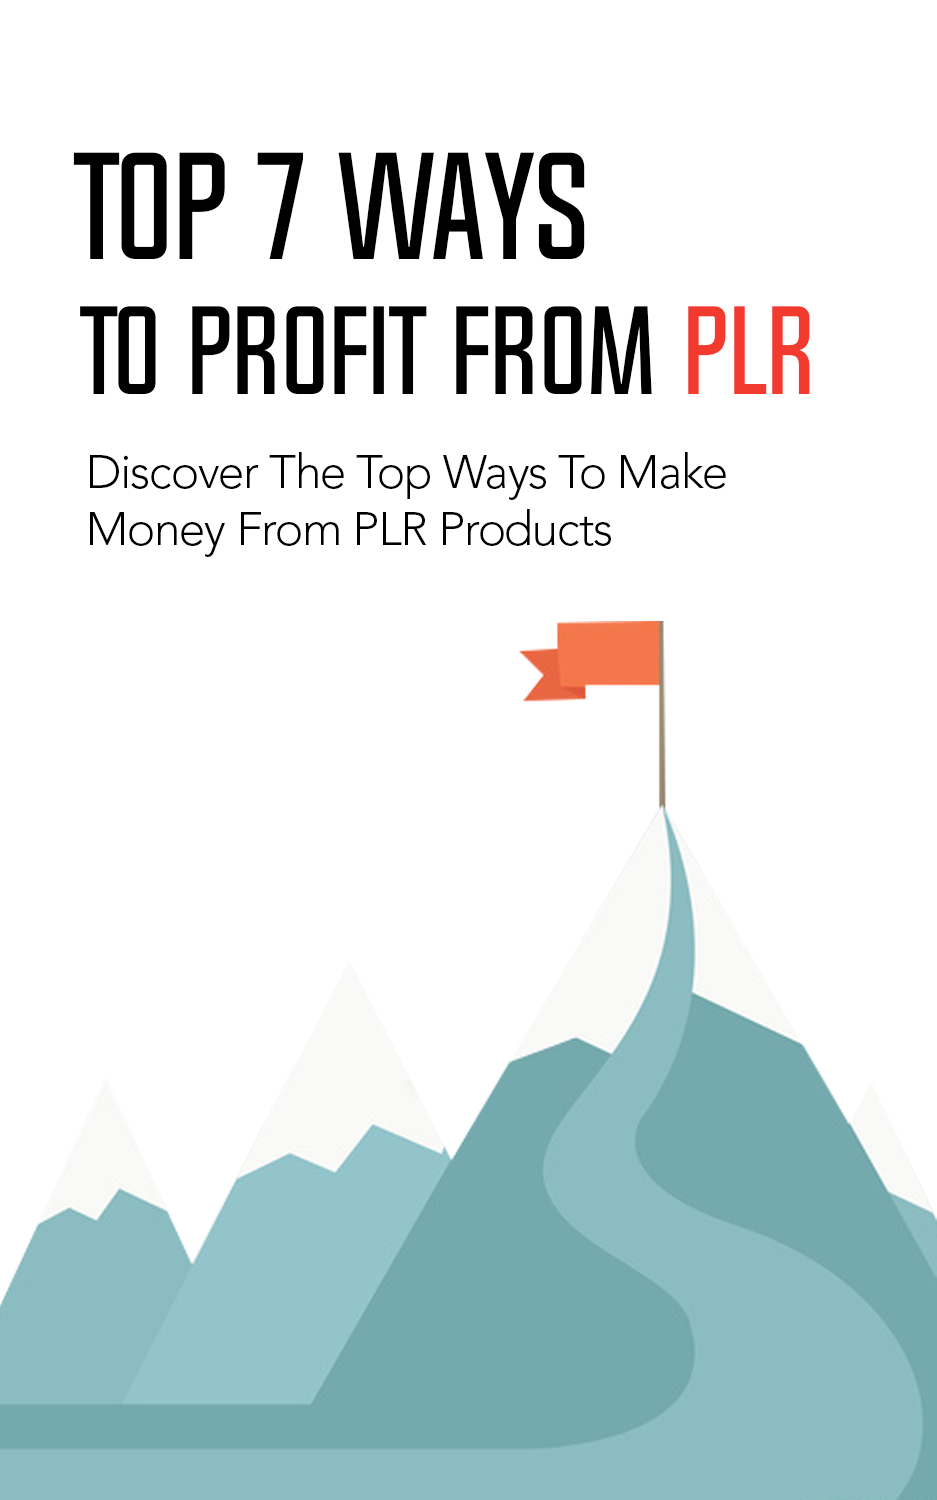 Top 7 Ways to Profit From PLR